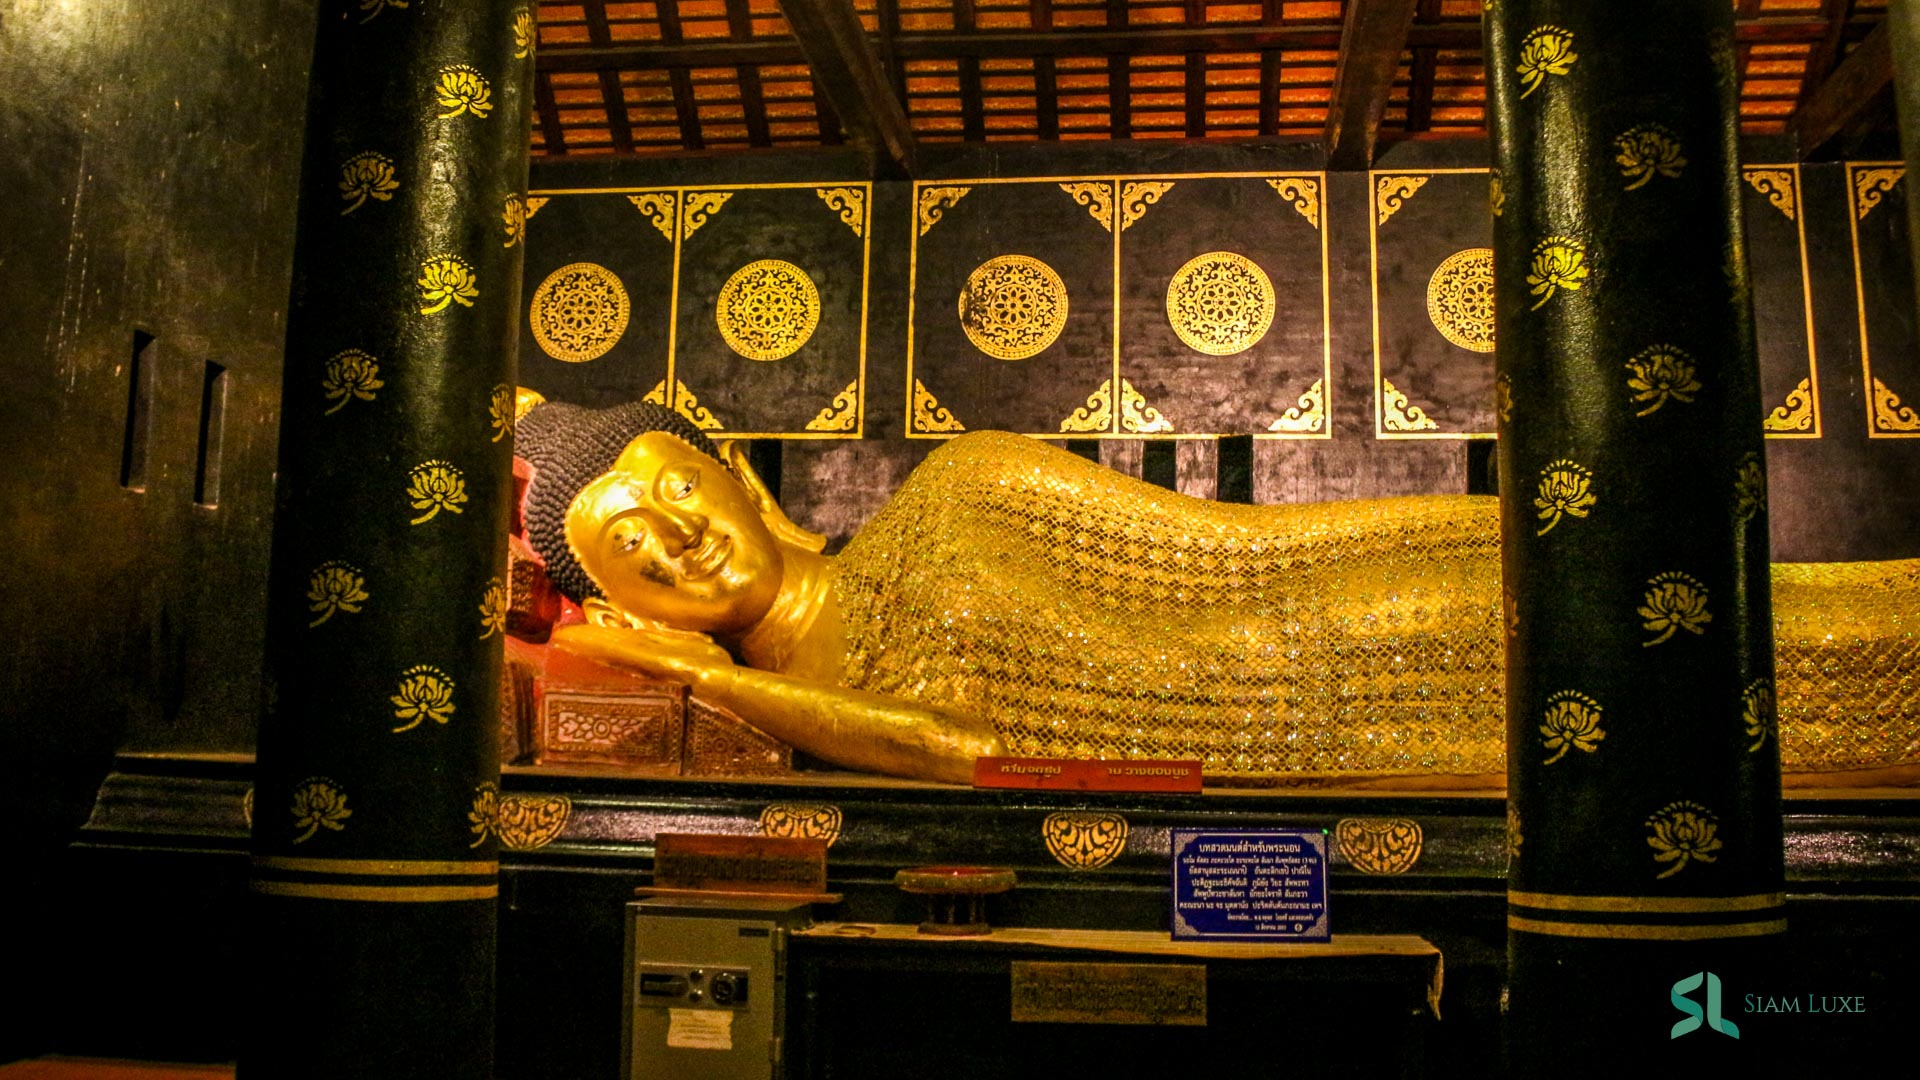 The Buddha image performs the gesture of Reclining Buddha, which a significant number of people mistakenly call the Sleeping Buddha